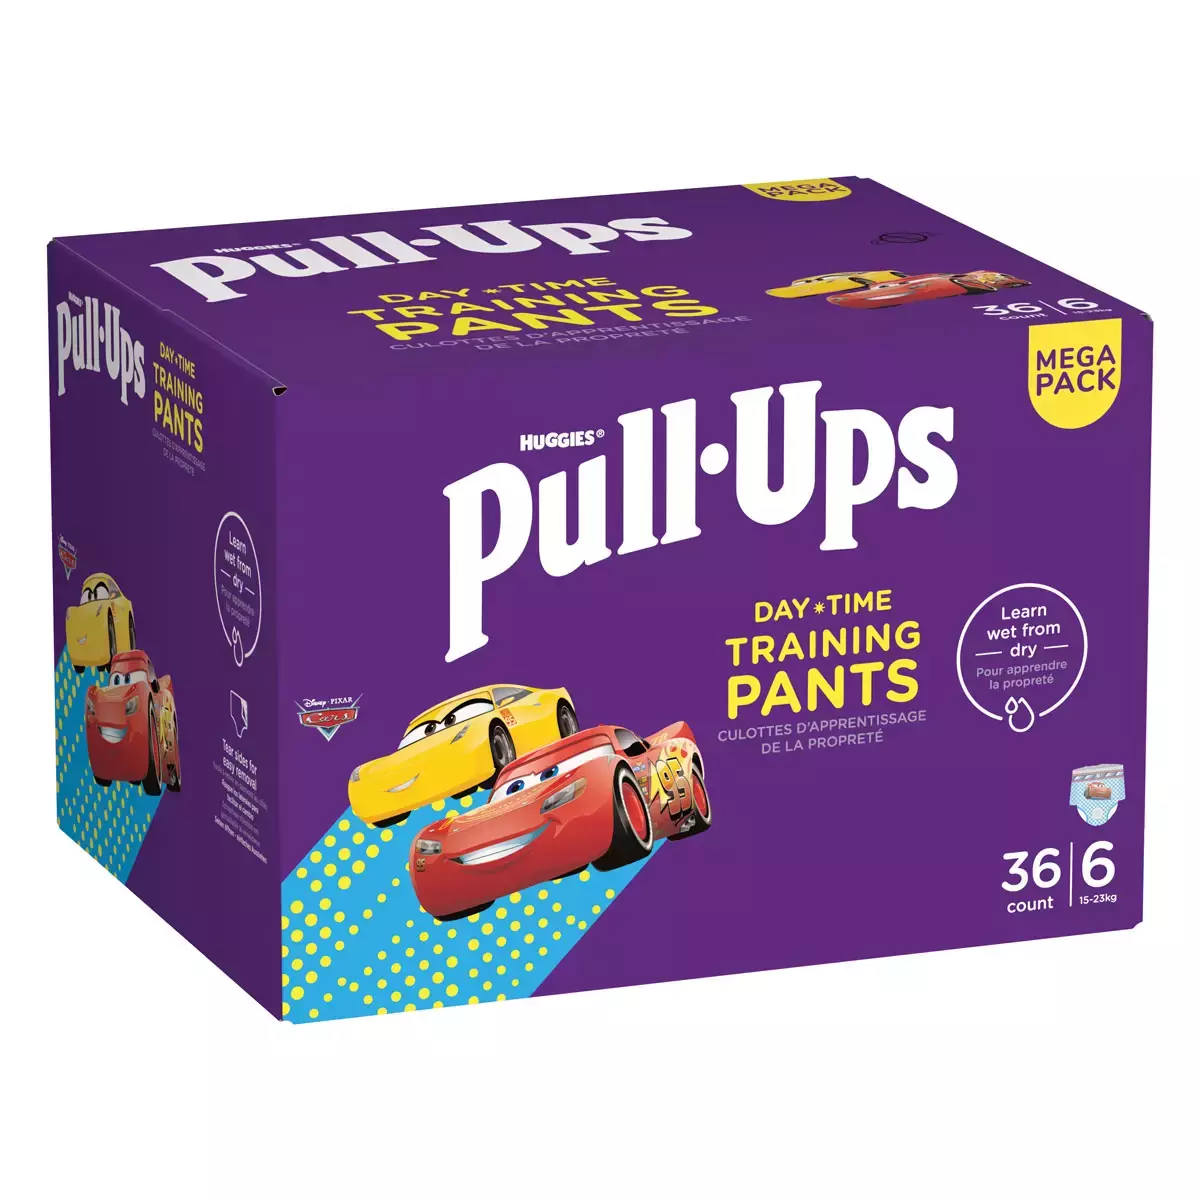 Huggies pull-ups day time boy training pants size 6, 36 pack costco